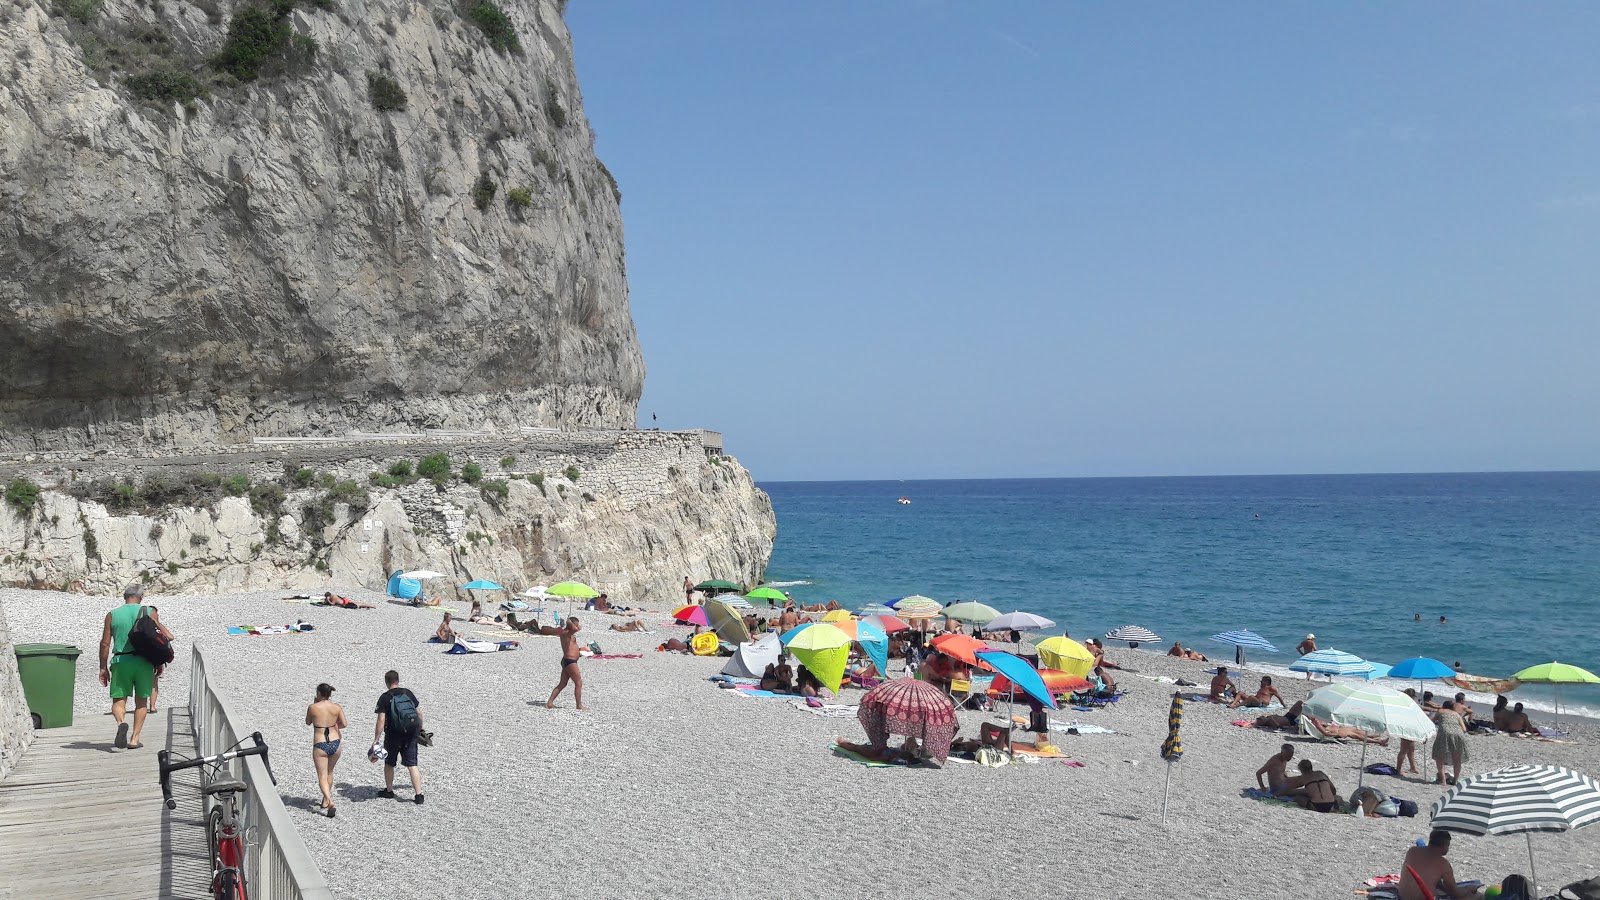 Photo of Spiaggia libera del Castelletto surrounded by mountains